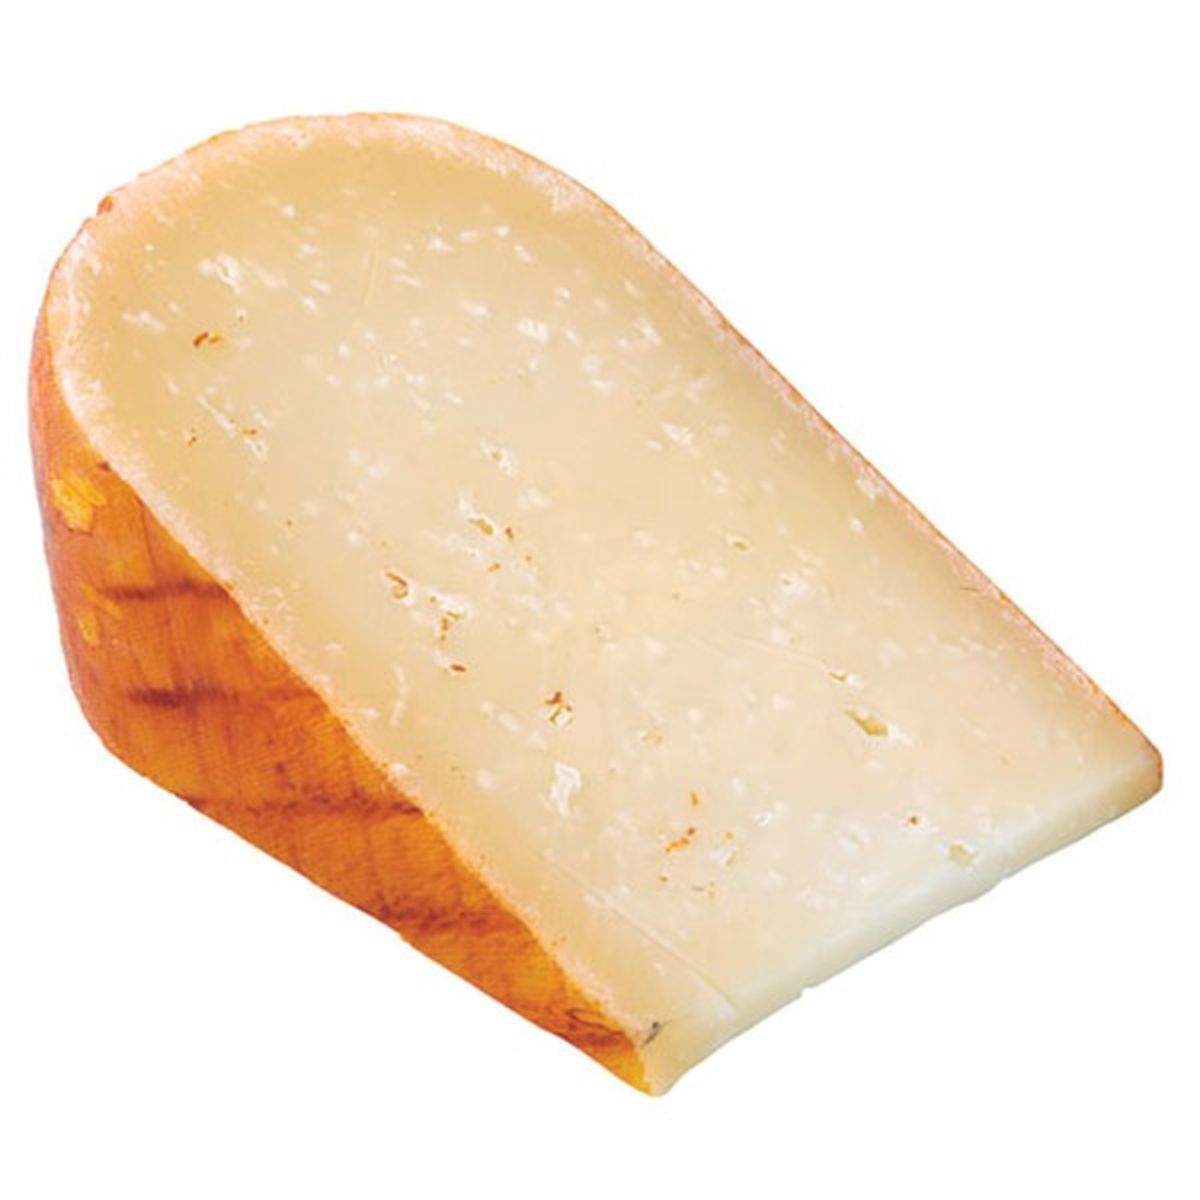 Calories in Mitica Aged Mahon Cheese